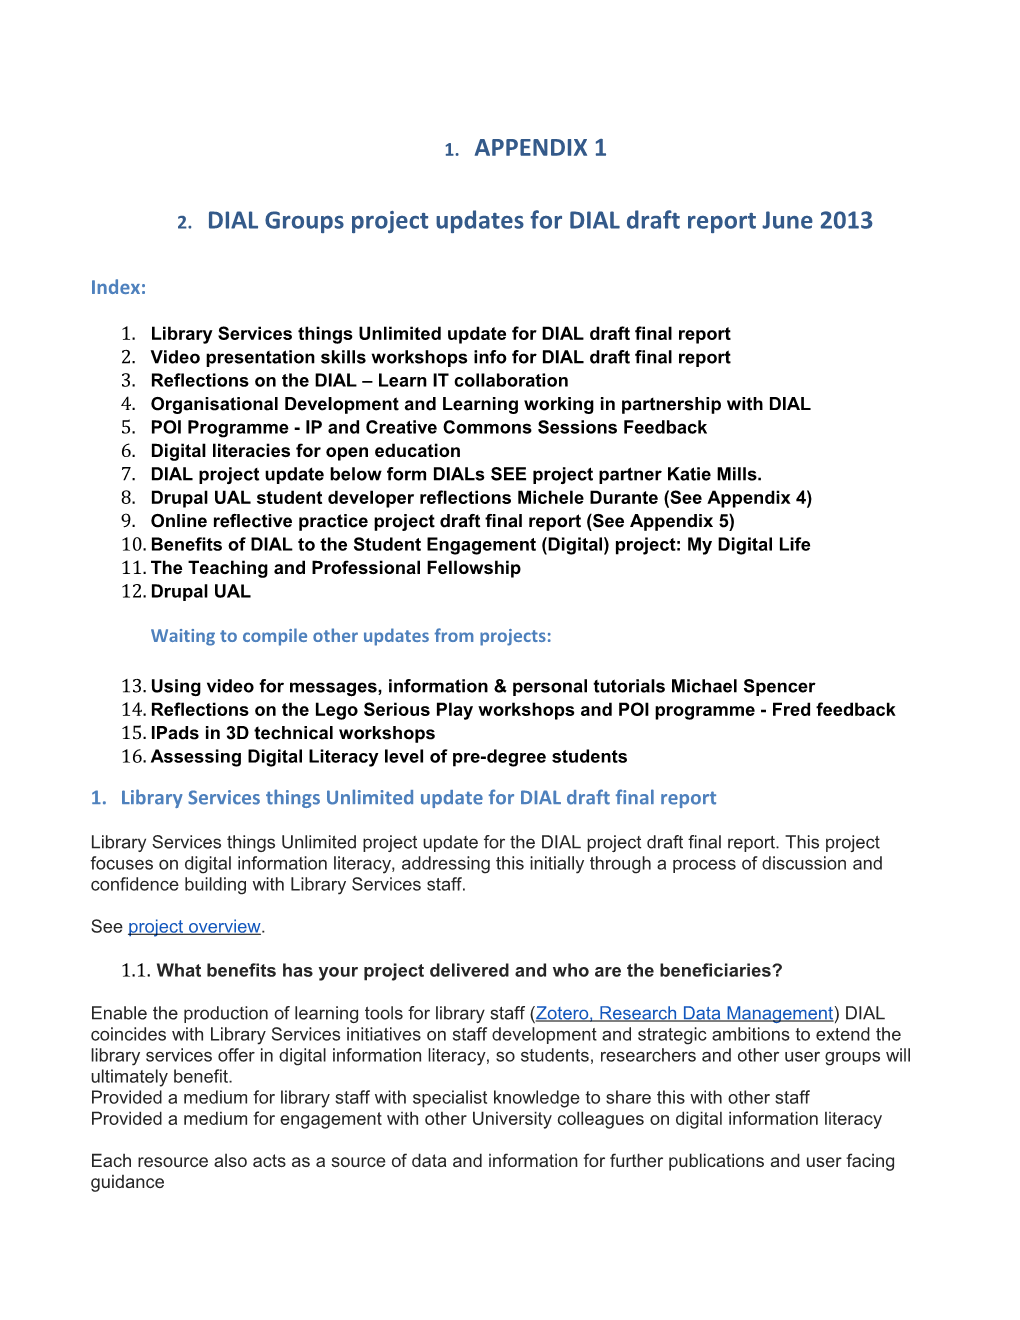 DIAL Groups Project Updates for DIAL Draft Report June 2013